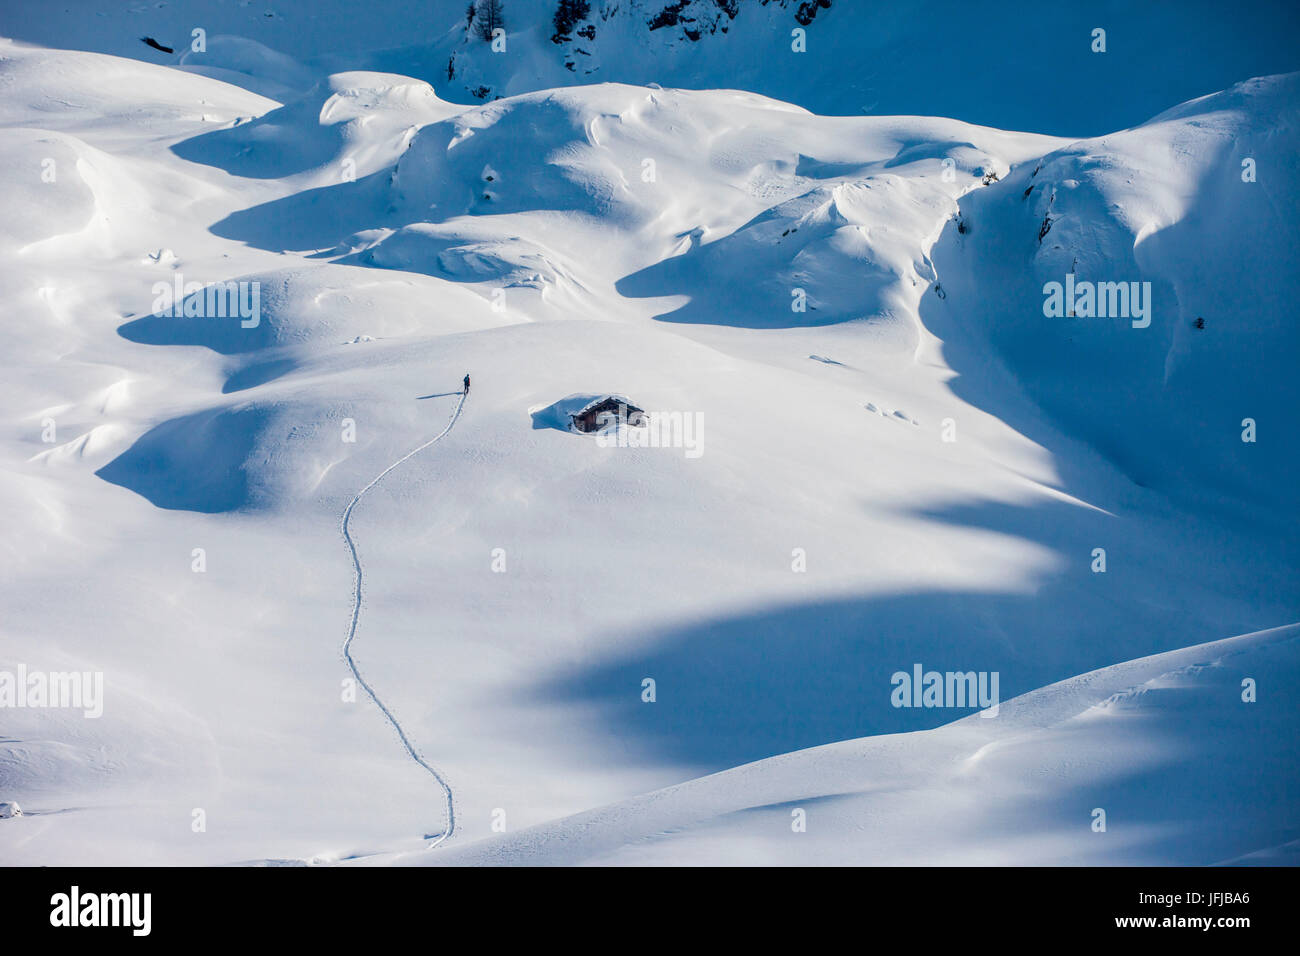 Ski mountainering at Tartano valley, Orobie alps, Lombardy, Italy Stock Photo